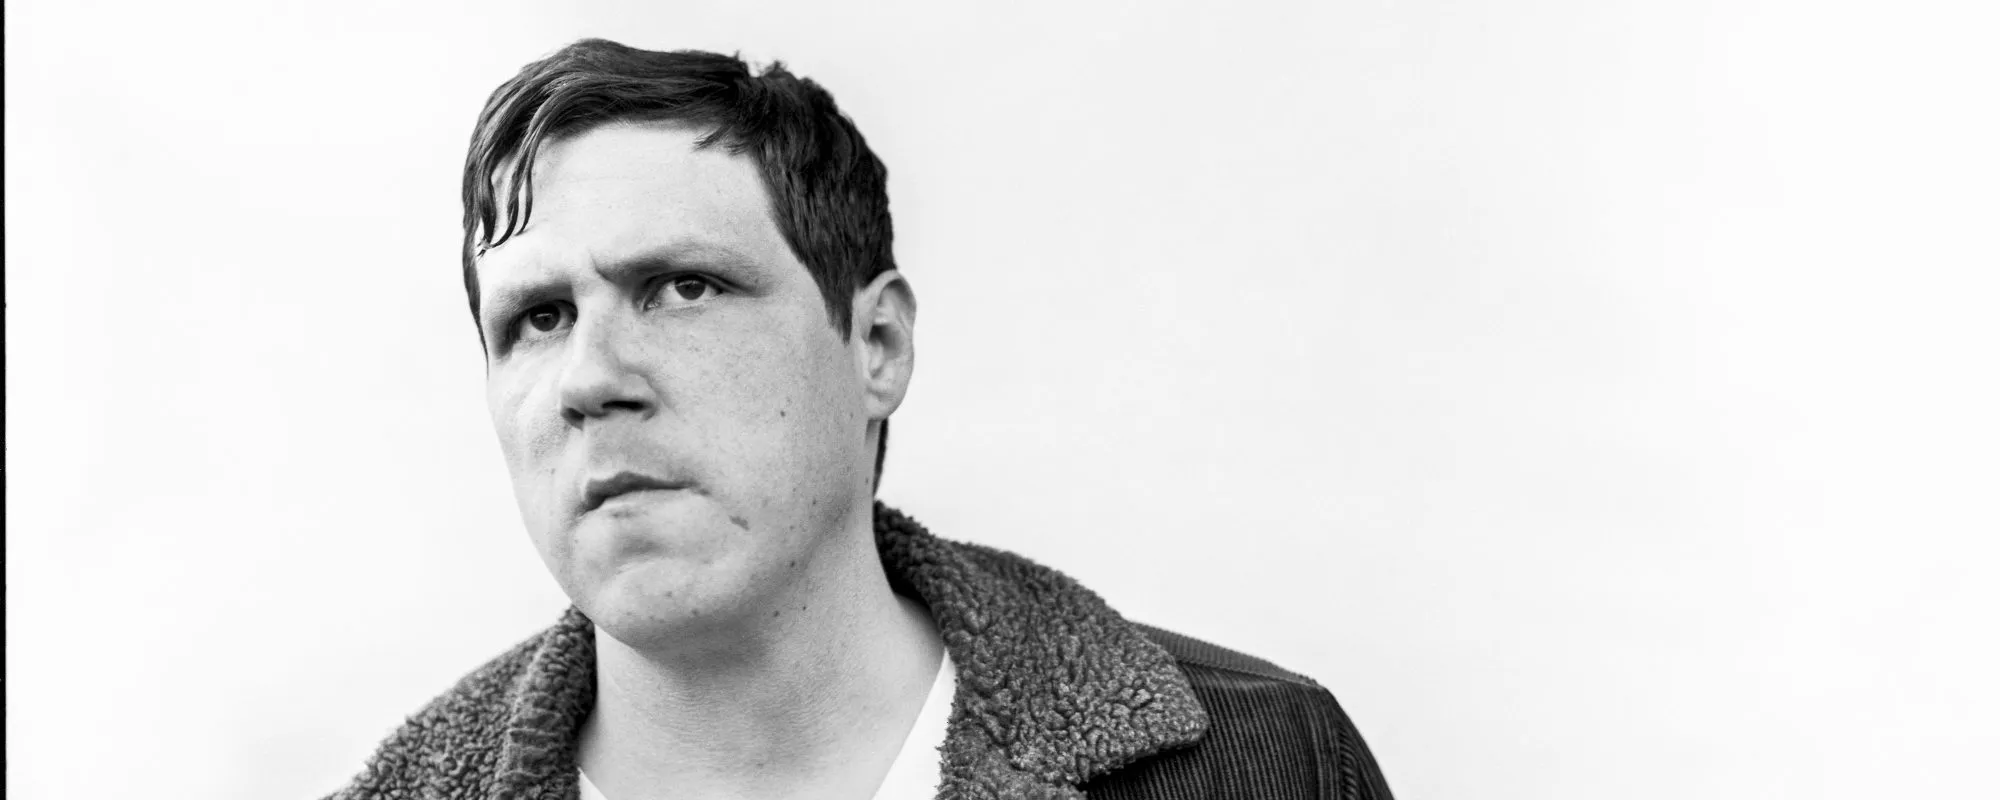 Damien Jurado is Leaving Spotify: “I Simply Cannot Continue to Support or Align Myself”